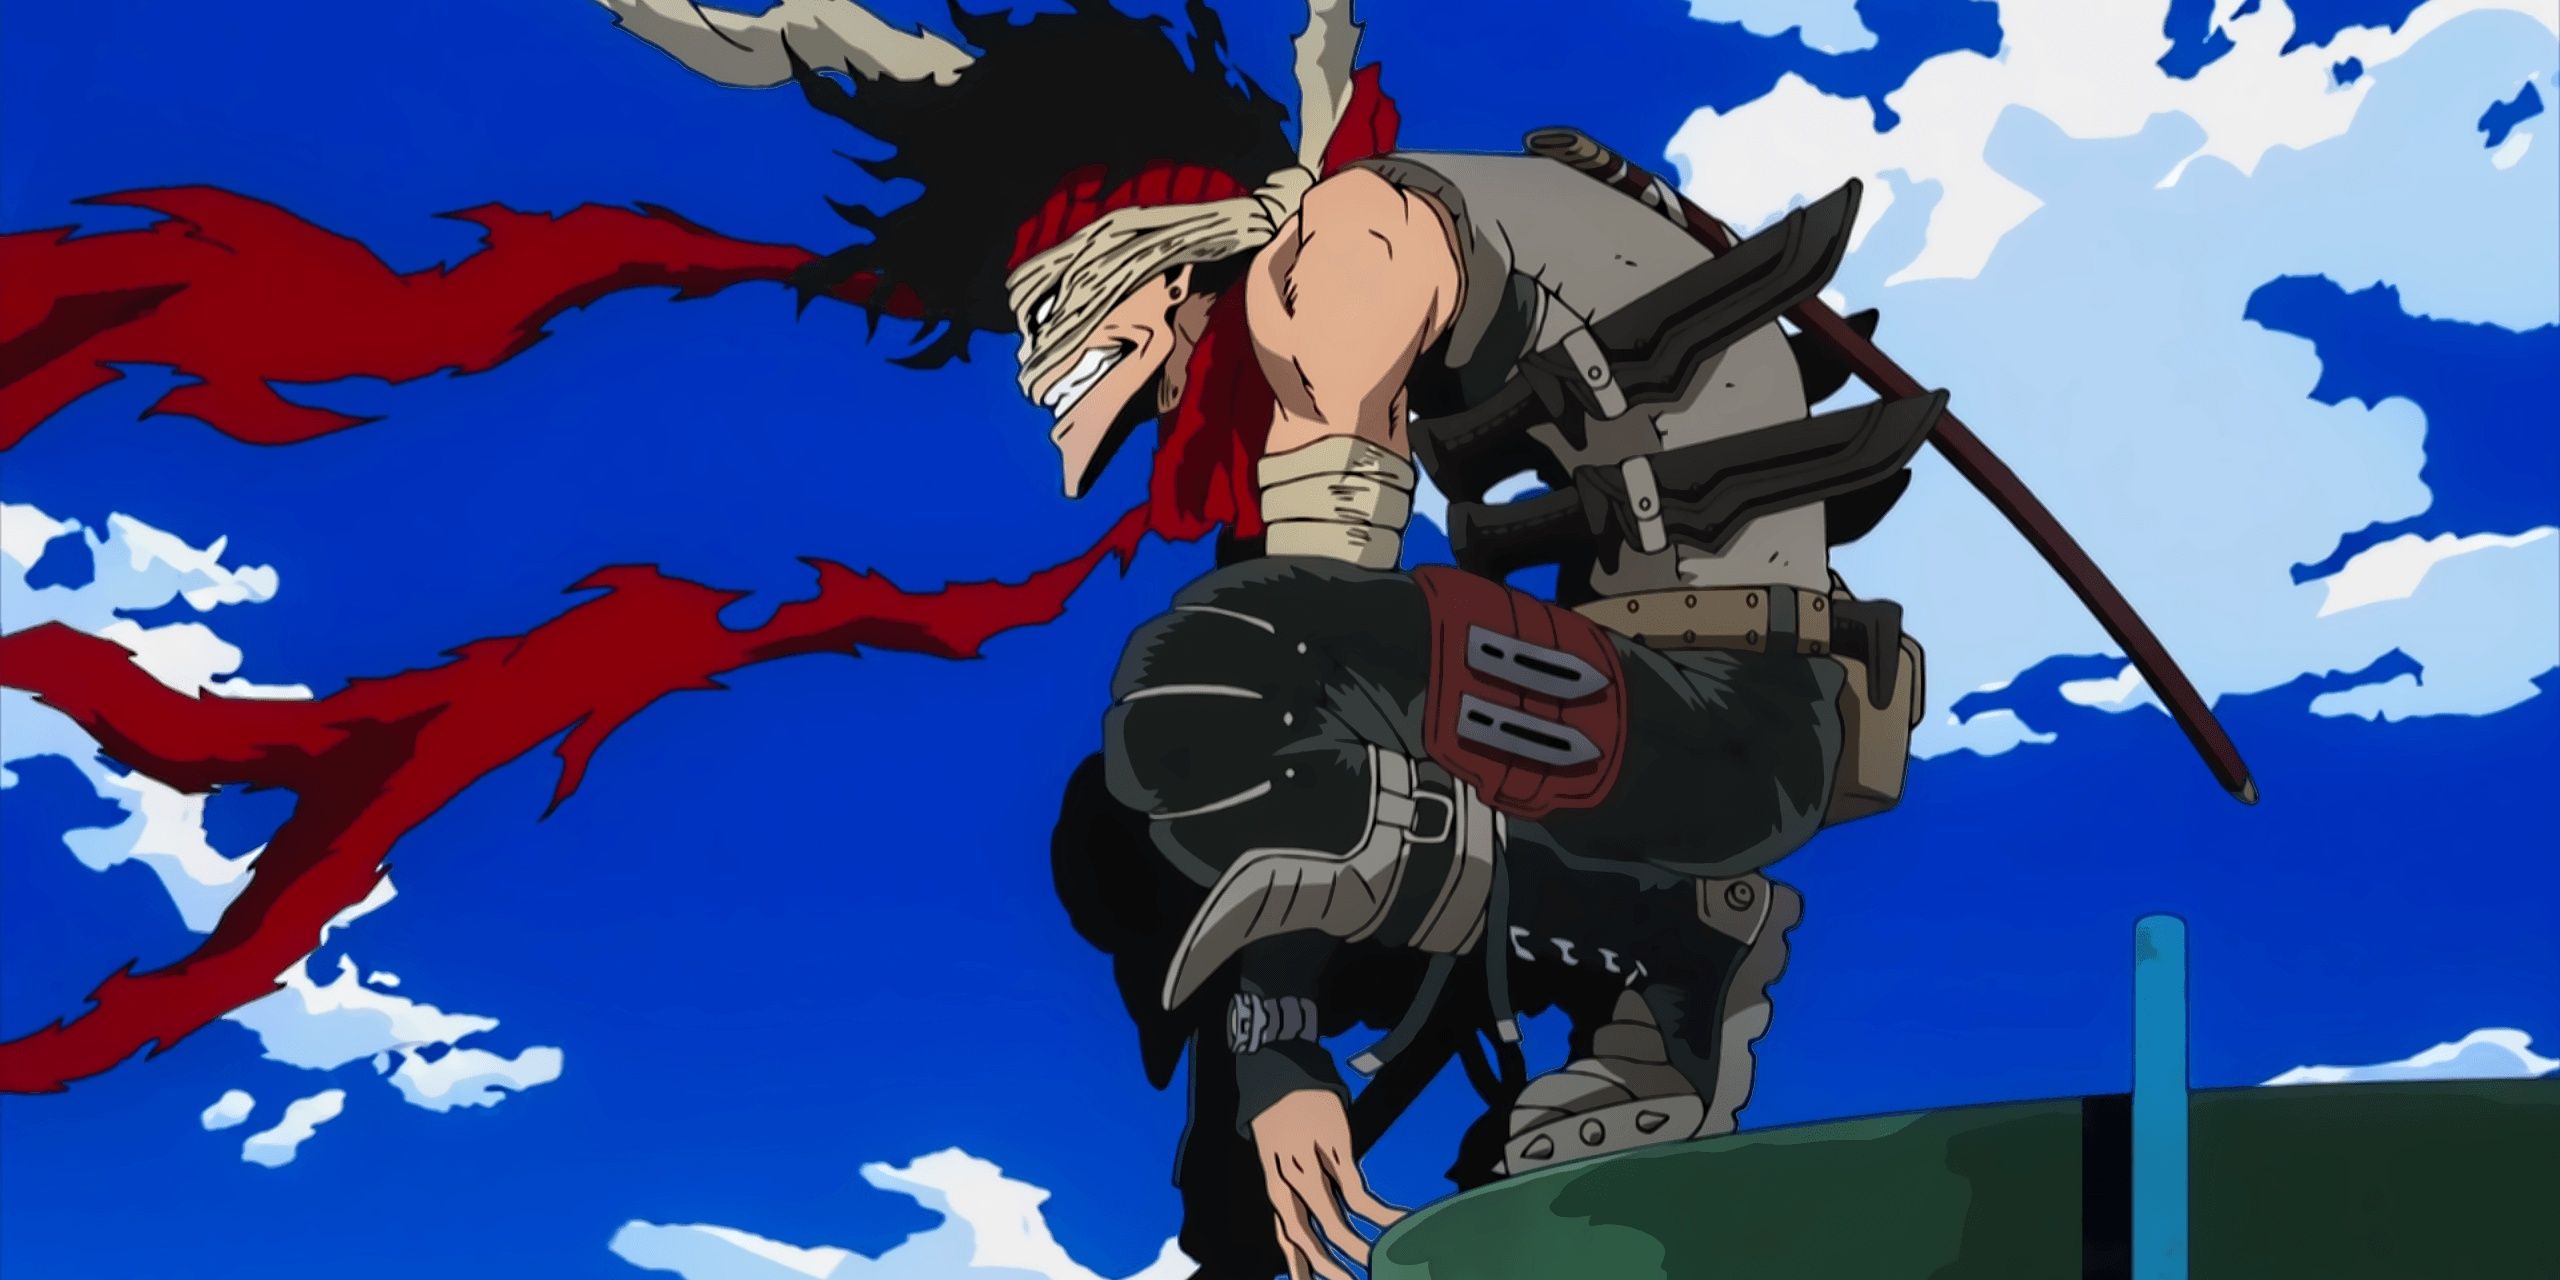 Hero Killer: Stain from My Hero Academia crouching on top a tower, not using his Quirk, Bloodcurdle.